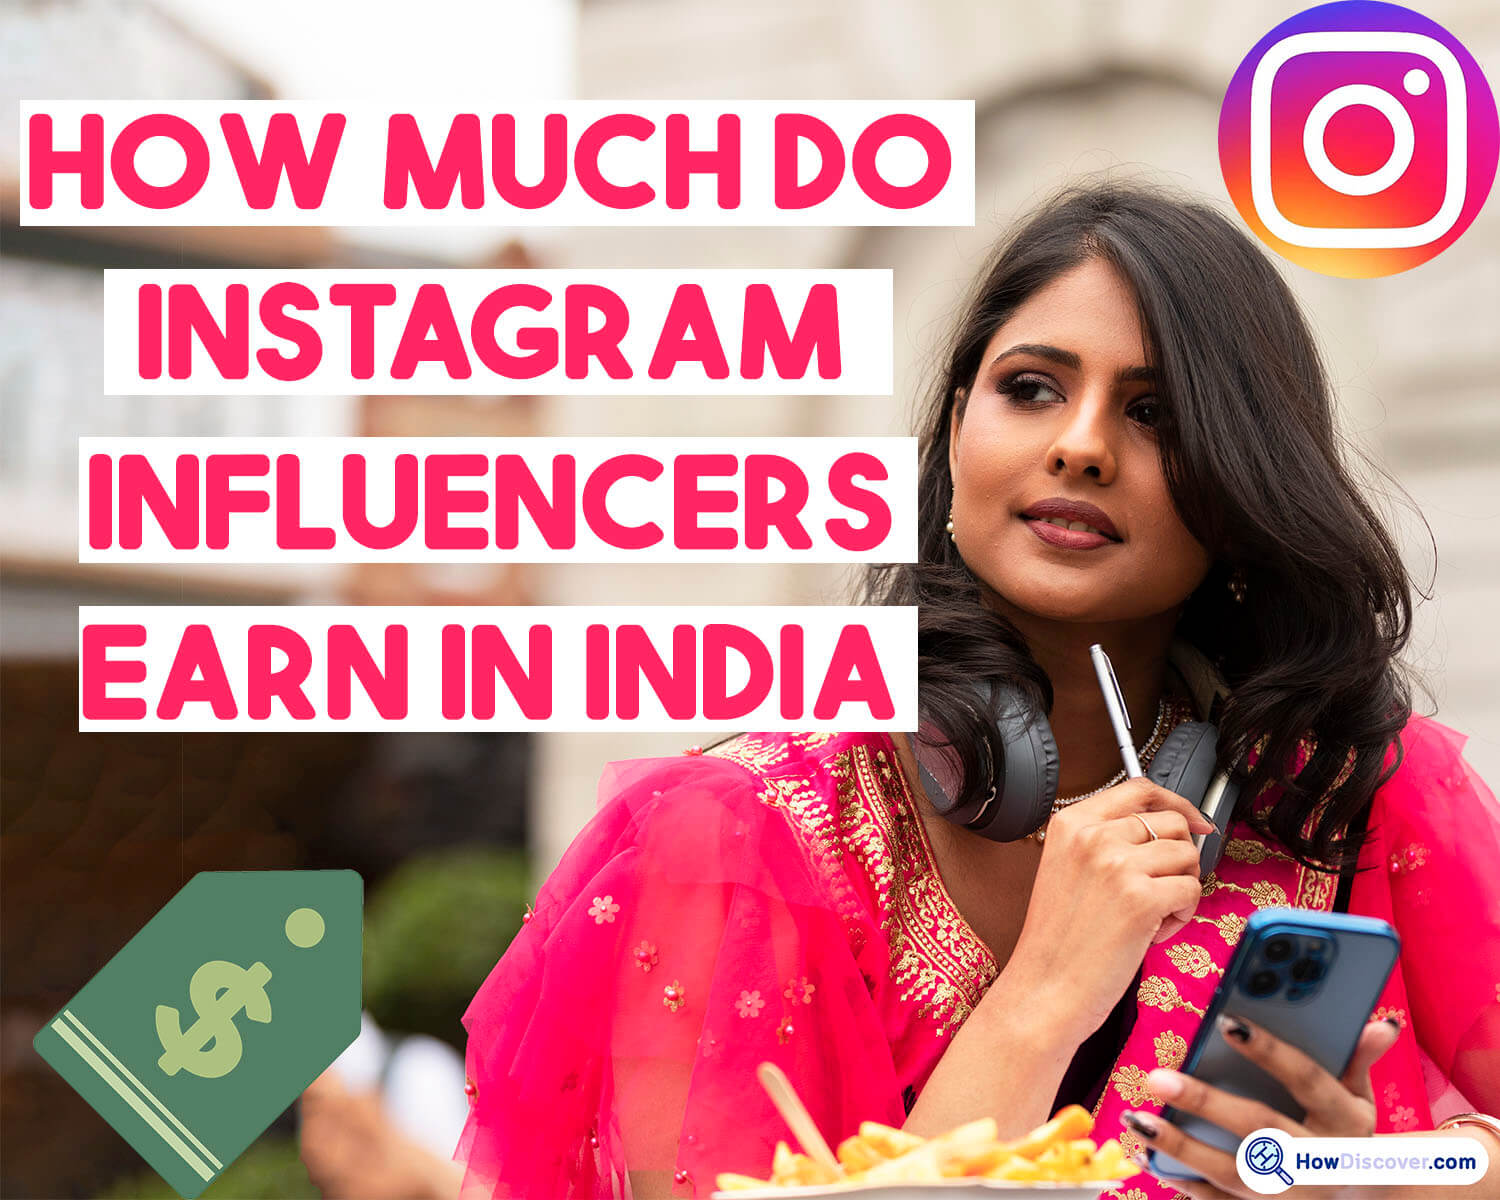 How Much Do Instagram Influencers Earn in India